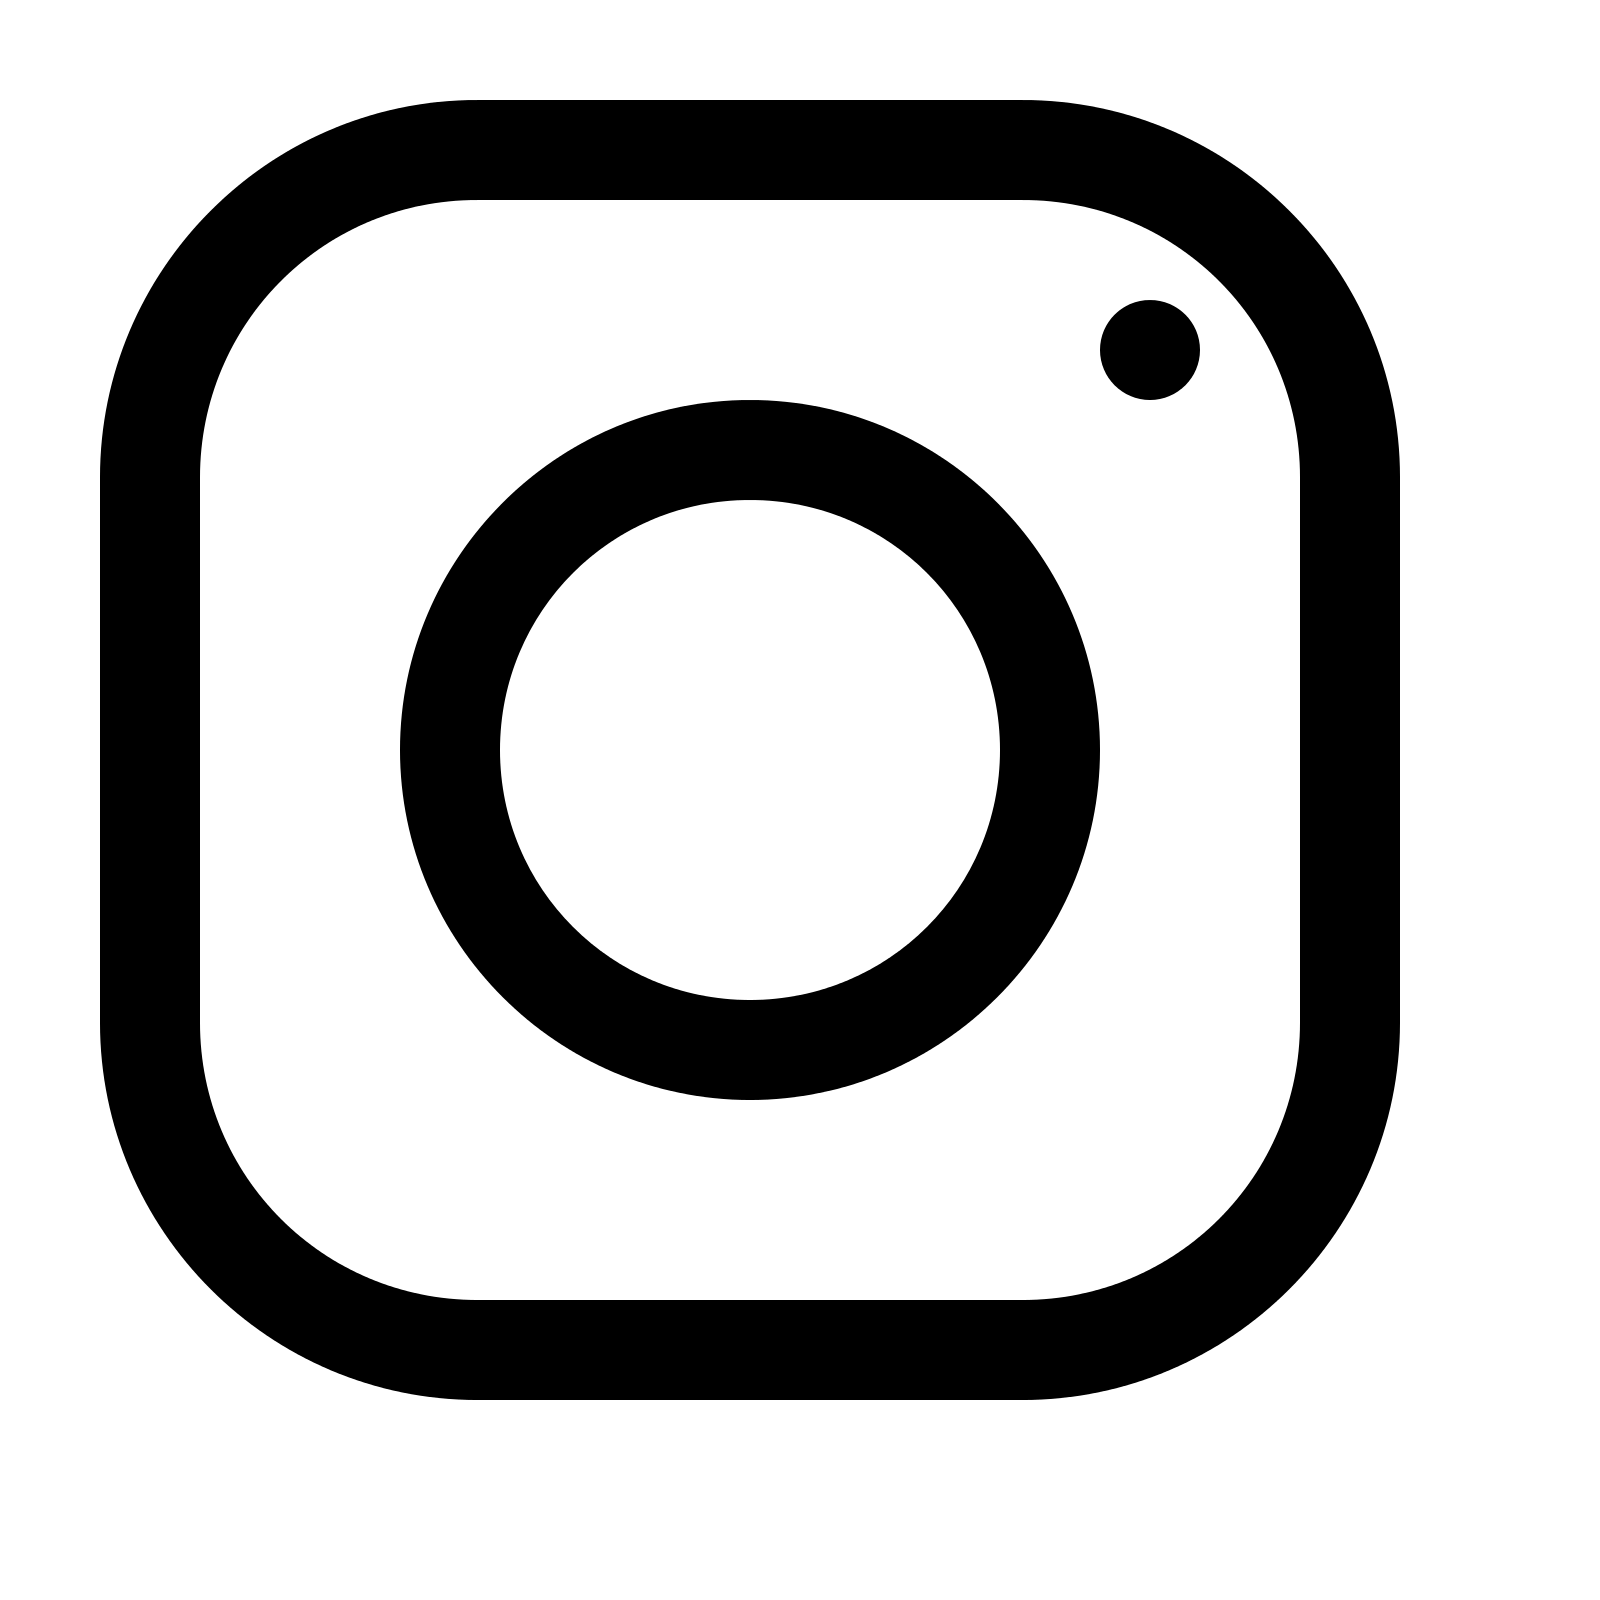 Cute Black and White Instagram Logo - White instagram logo png- picture and clipart, download free